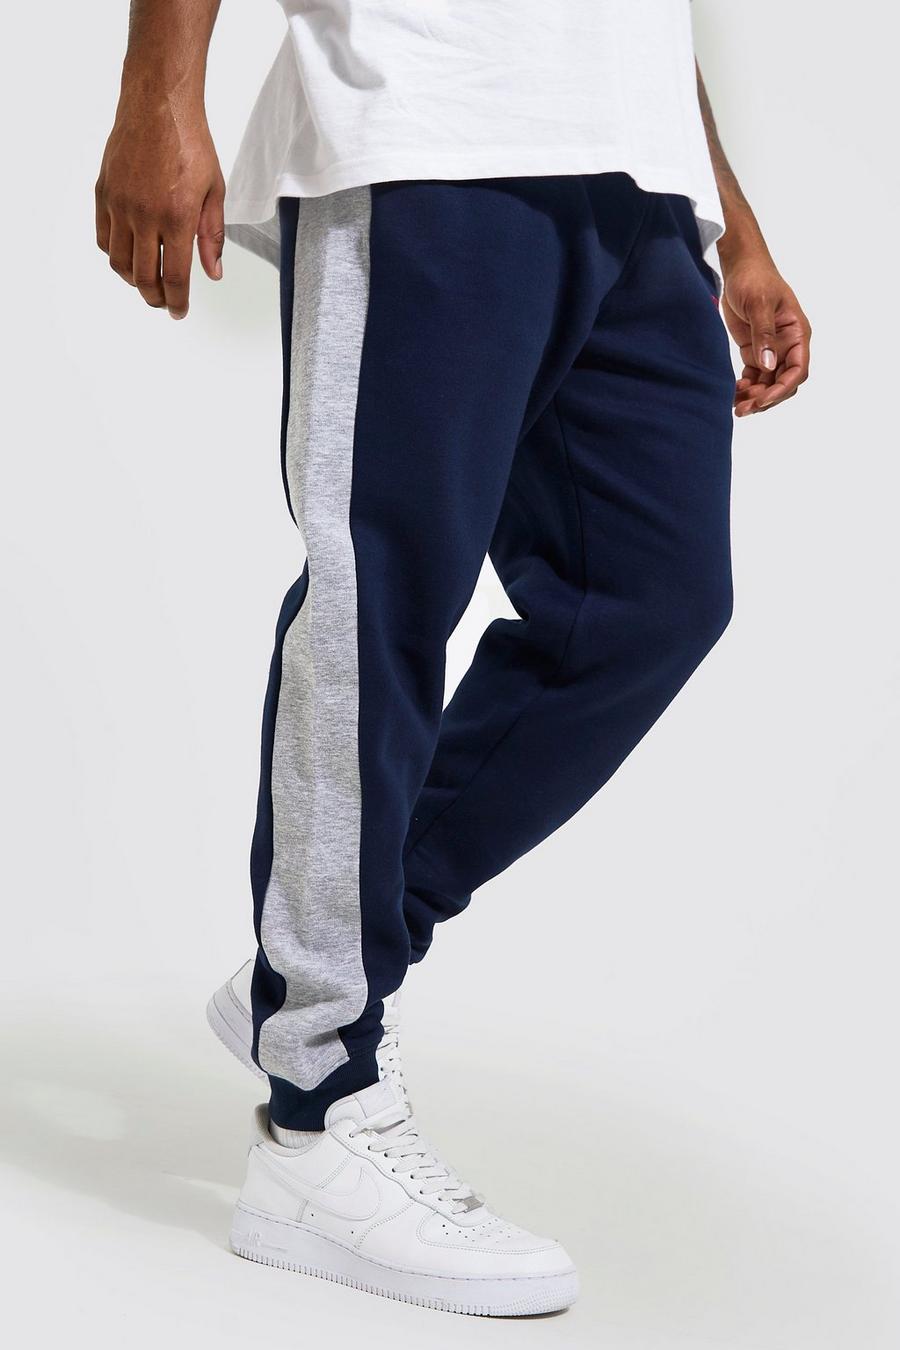 Pantalón deportivo Plus Offcl pitillo con panel lateral, Navy blu oltremare image number 1